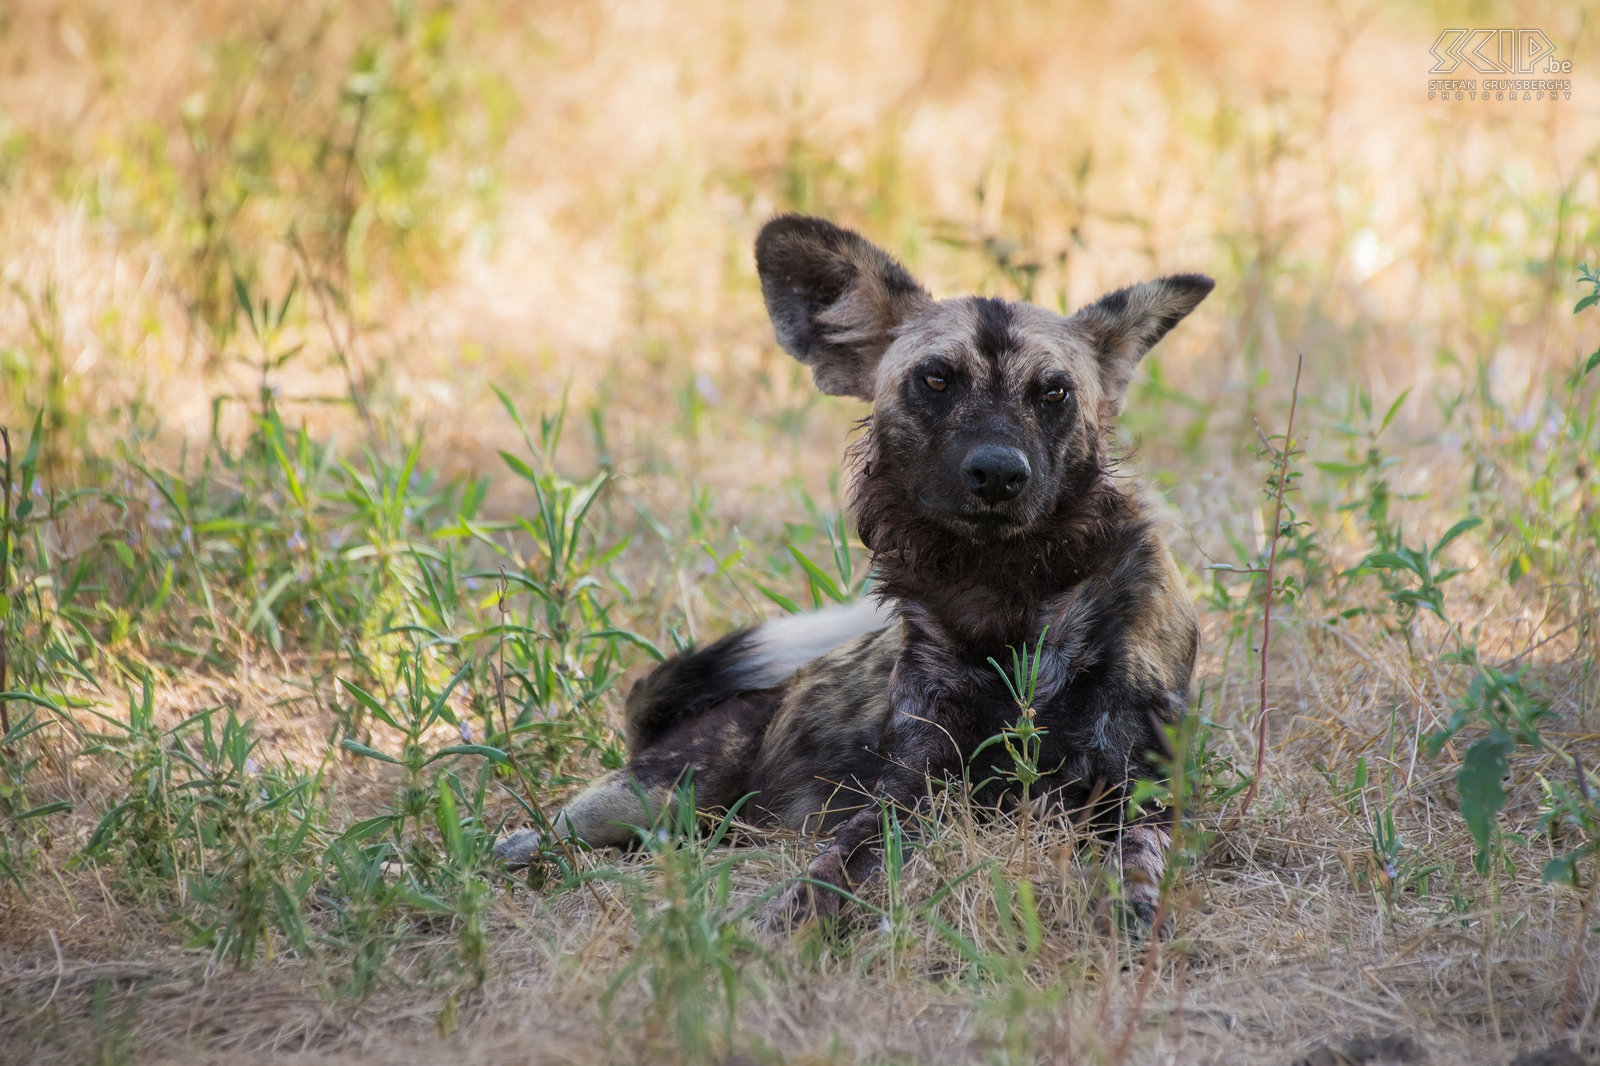 South Luangwa - Wild dog African wild dogs (African Painted dog, Lycaon pictus) are an endangered species that can travel huge distances. They have very strong social bonds and are specialised pack hunters of common medium-sized antelopes. Stefan Cruysberghs